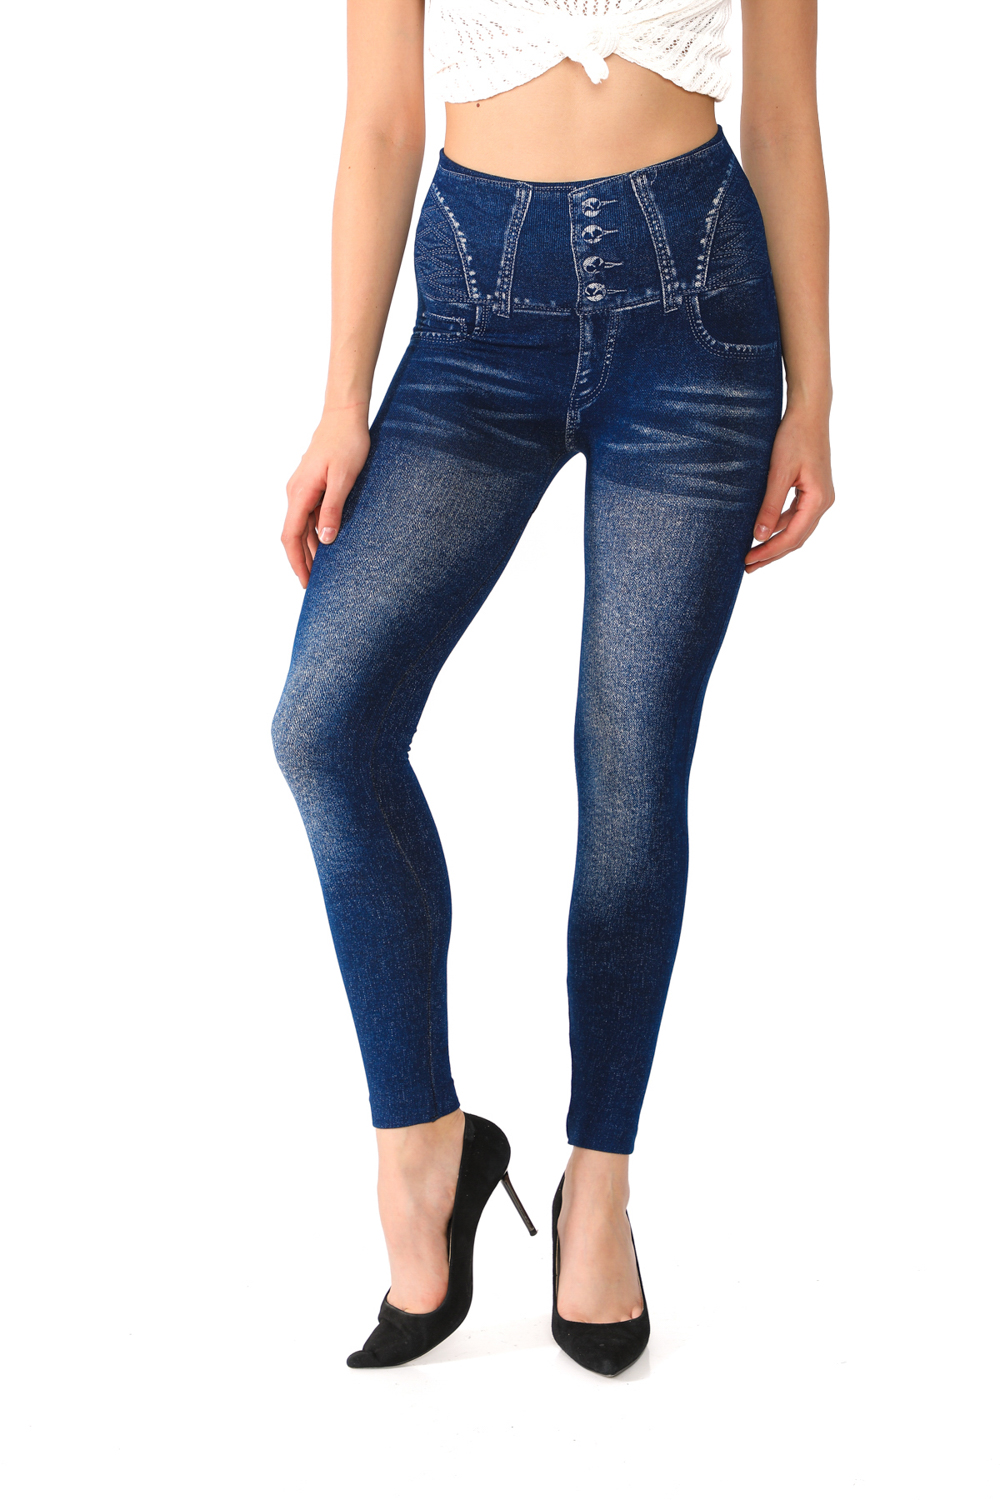 Denim Leggings with Fake Pockets and Button Pattern - 4